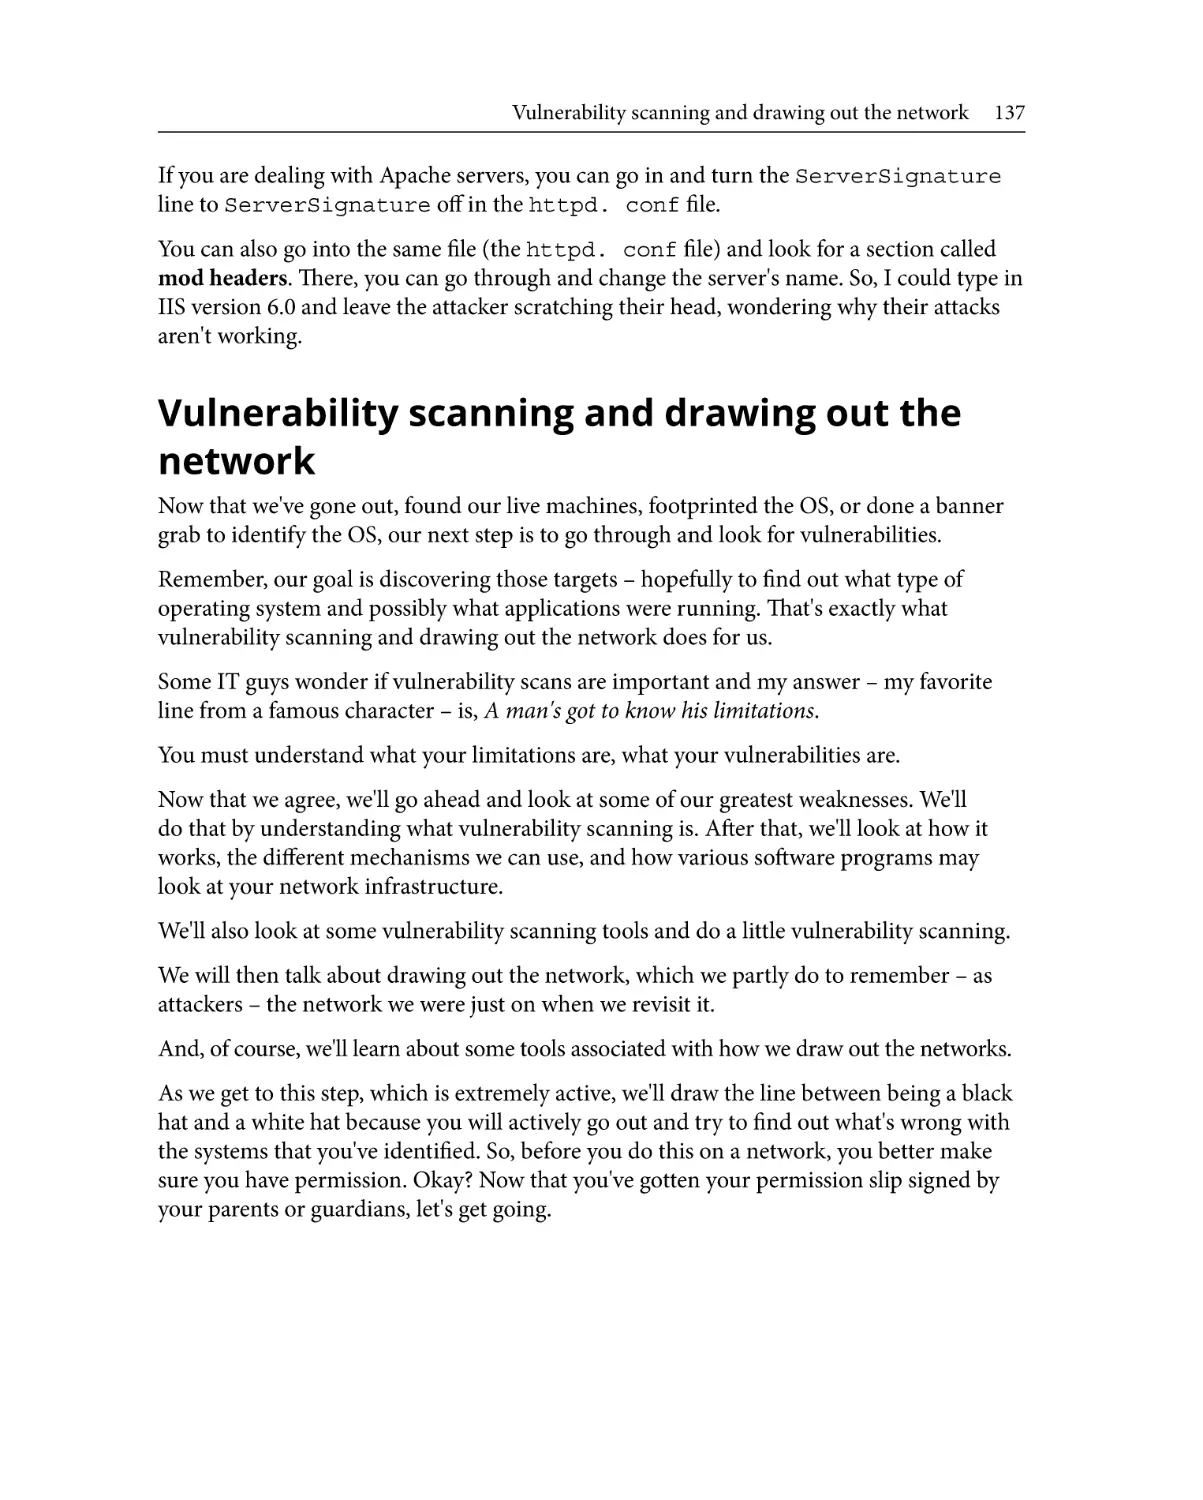 Vulnerability scanning and drawing out the network